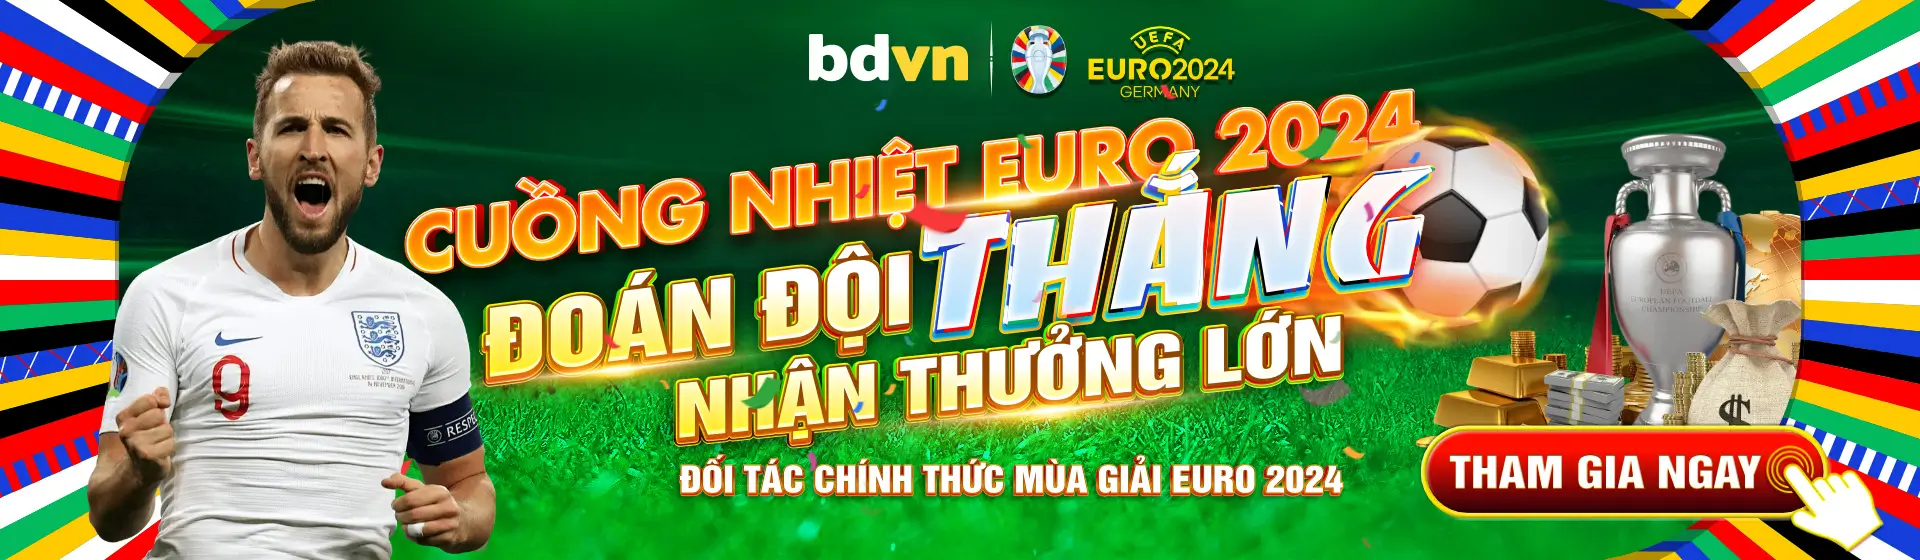 banner bdvn dong hanh cung euro 2024